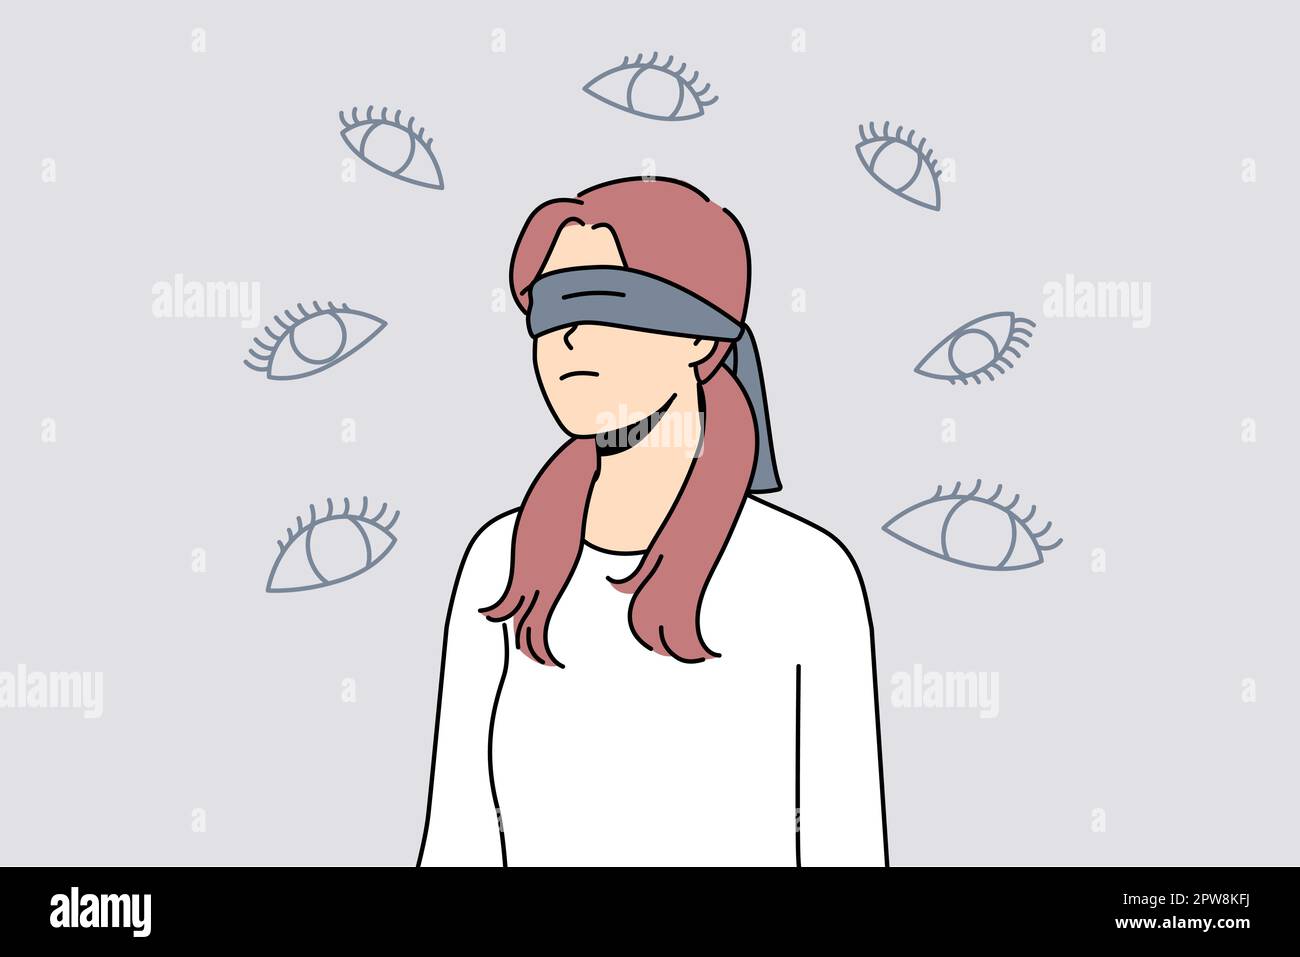 Blindfolded woman stalked with numerous eyes Stock Vector